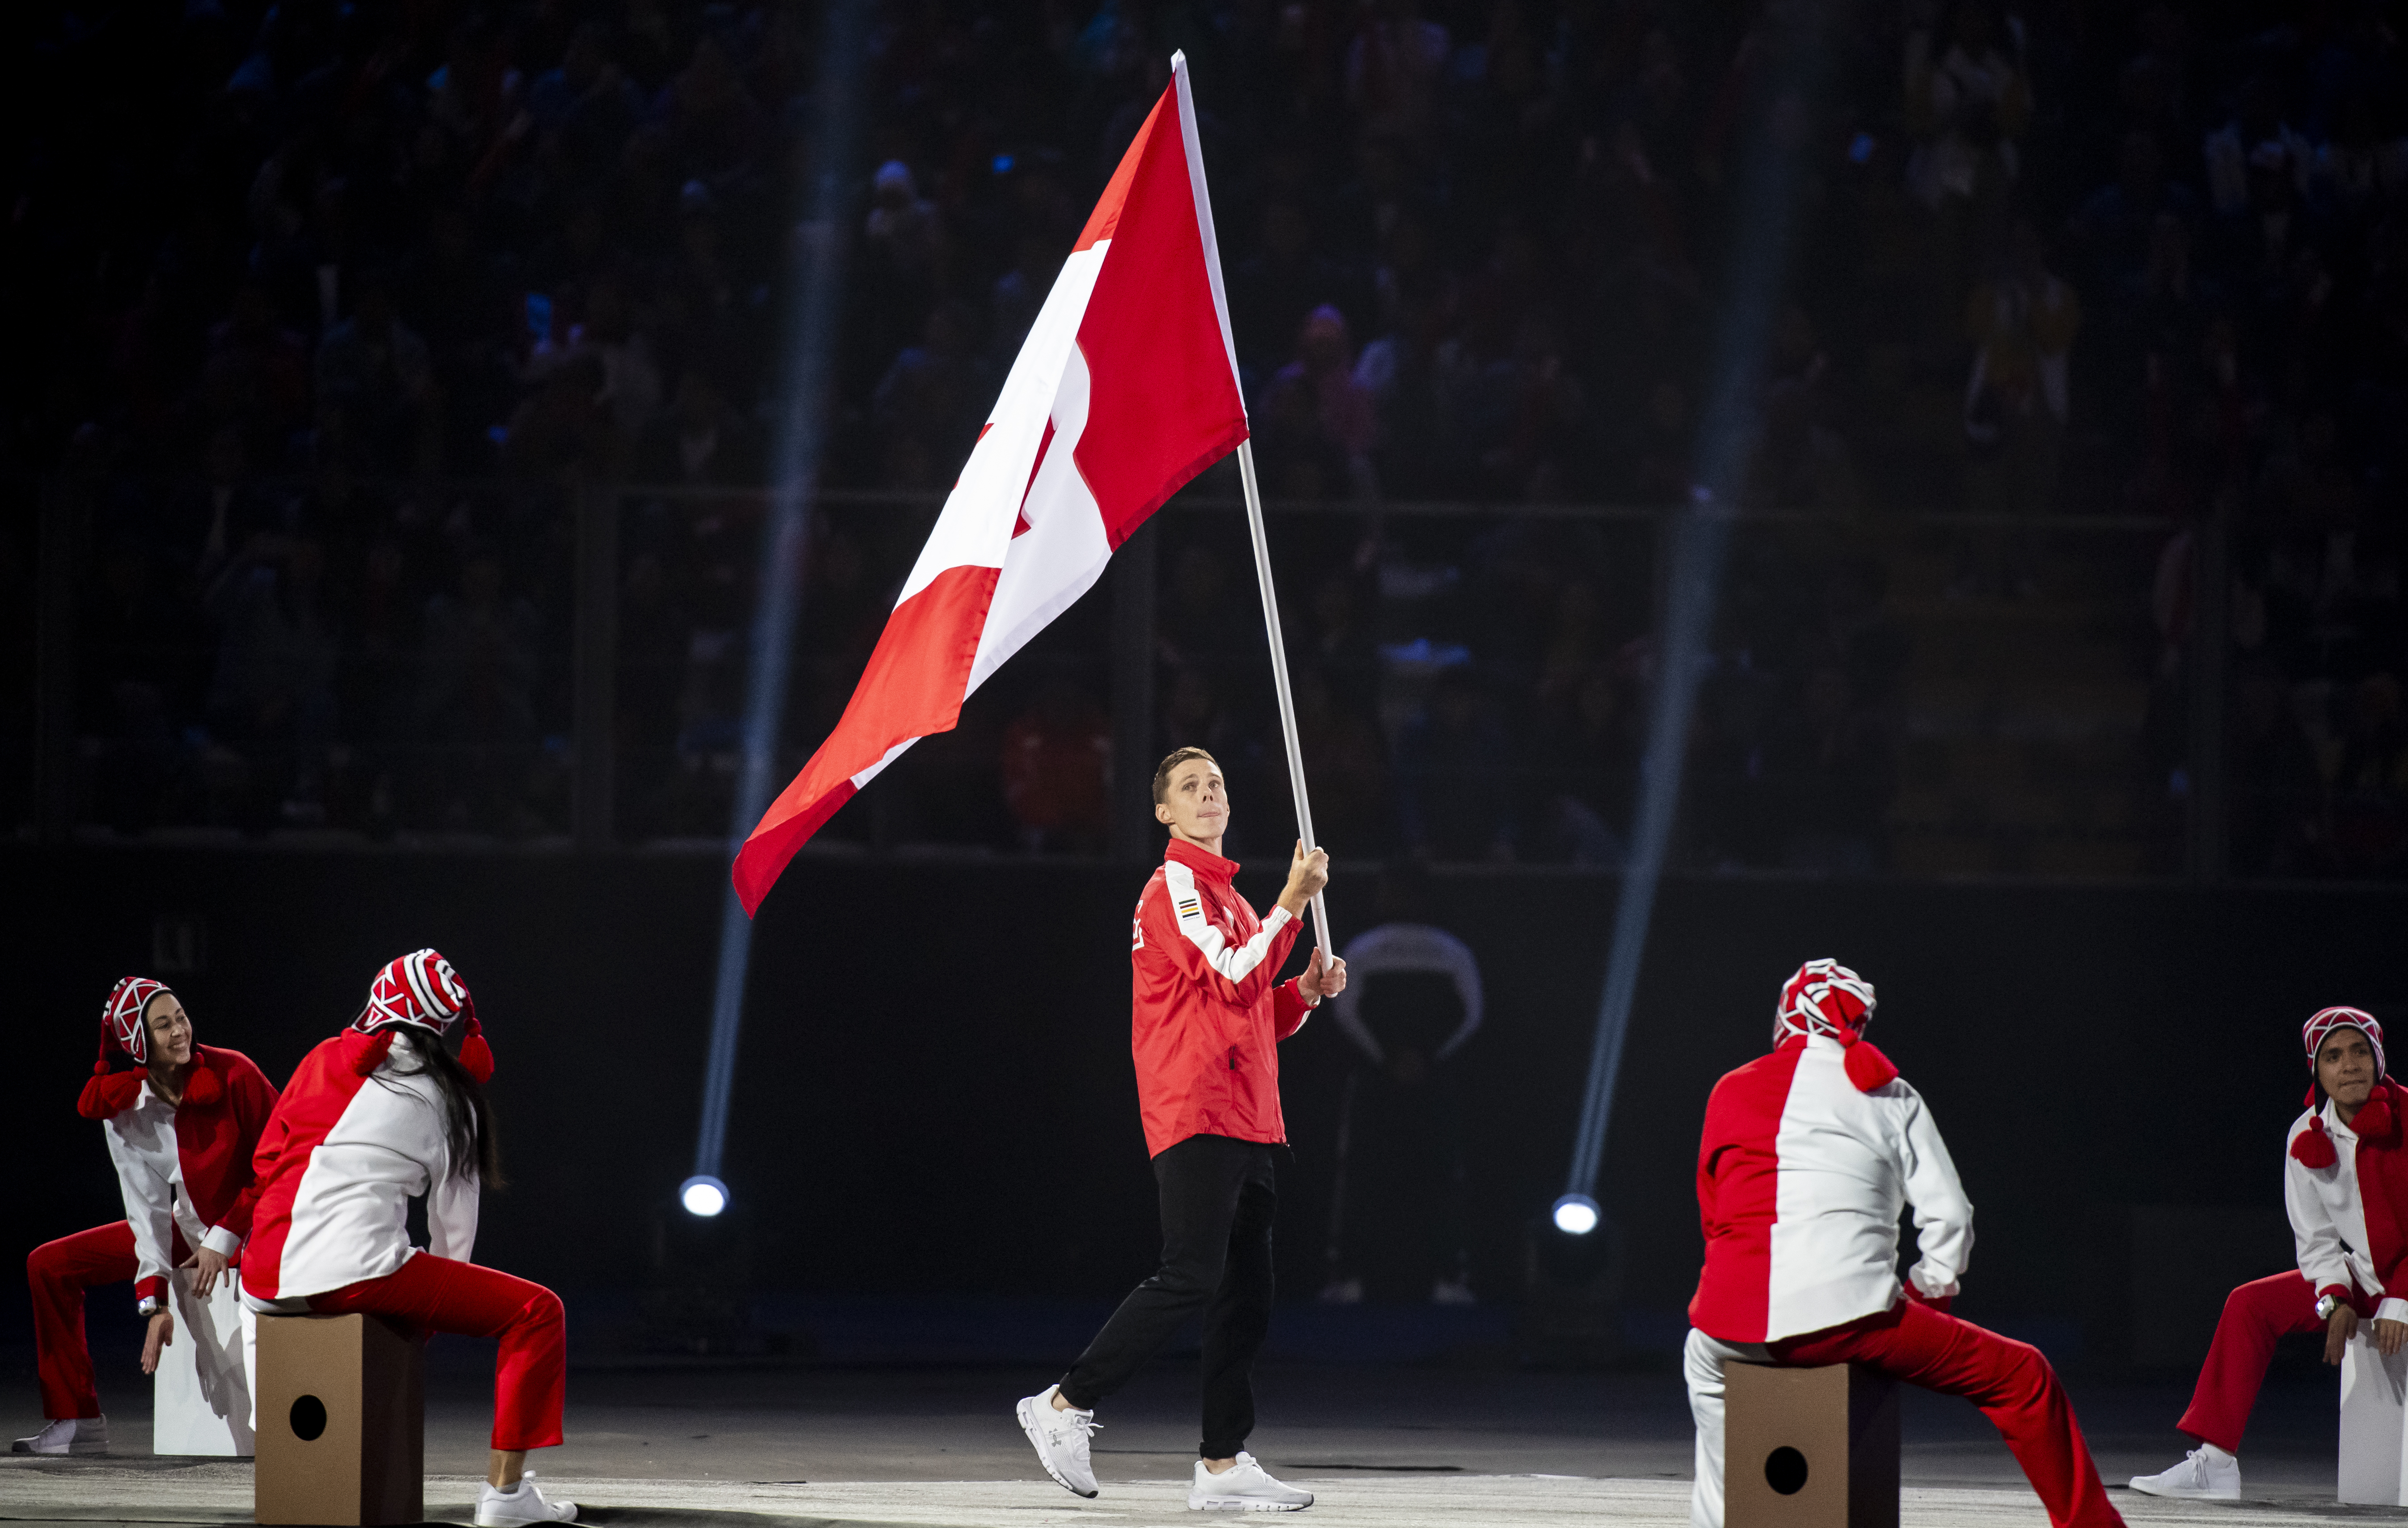 Scott Tupper, flag bearer for Team Canada, enters the Estadio Nacional to officially start the Lima 2019 Pan American Games